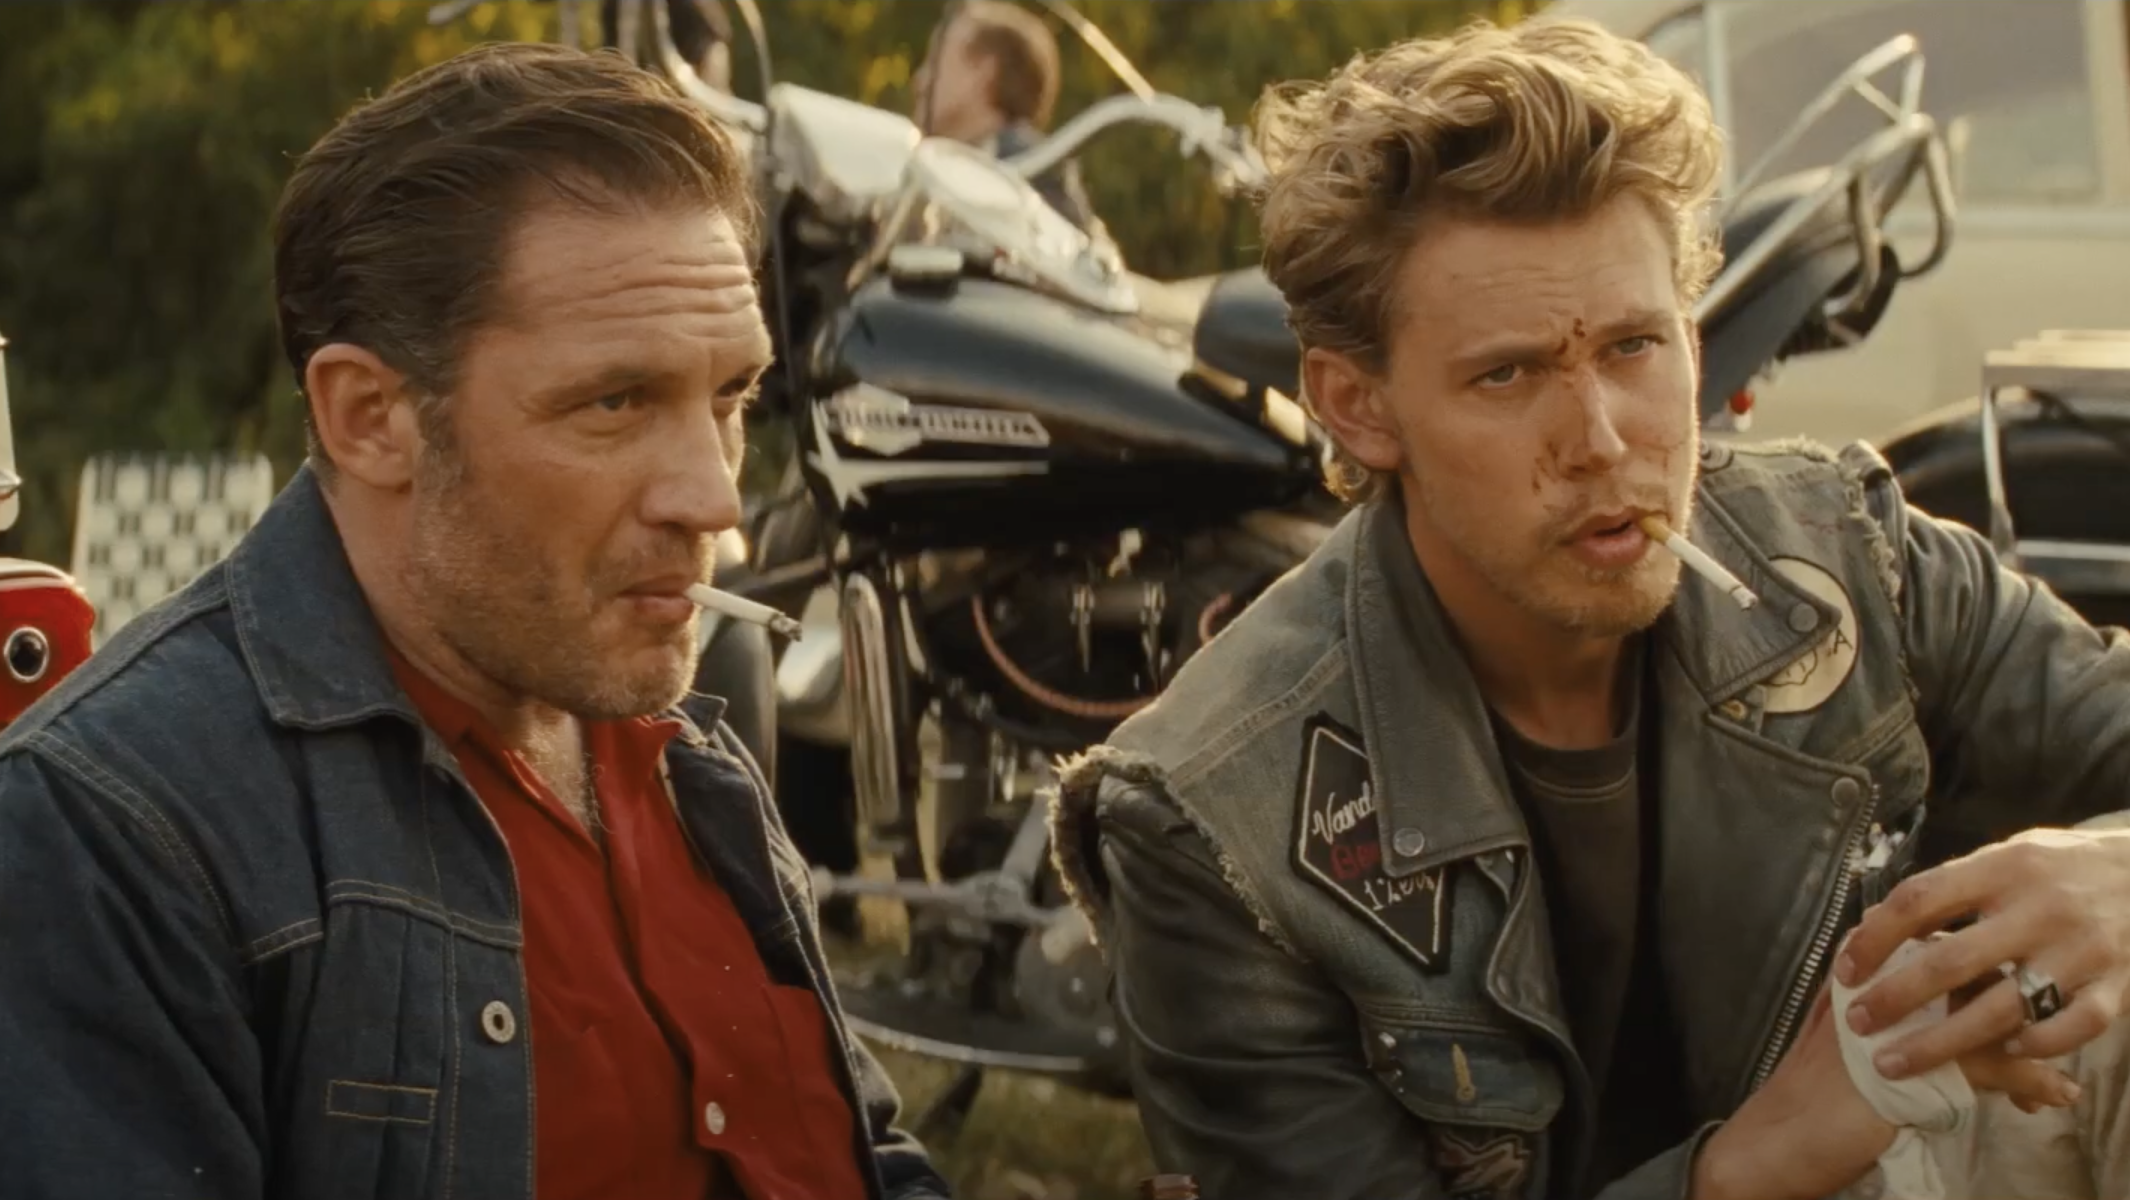 You’ve Got Male: How ‘The Bikeriders’ Taps into Our New Ambivalence About the Primal Masculine Mystique